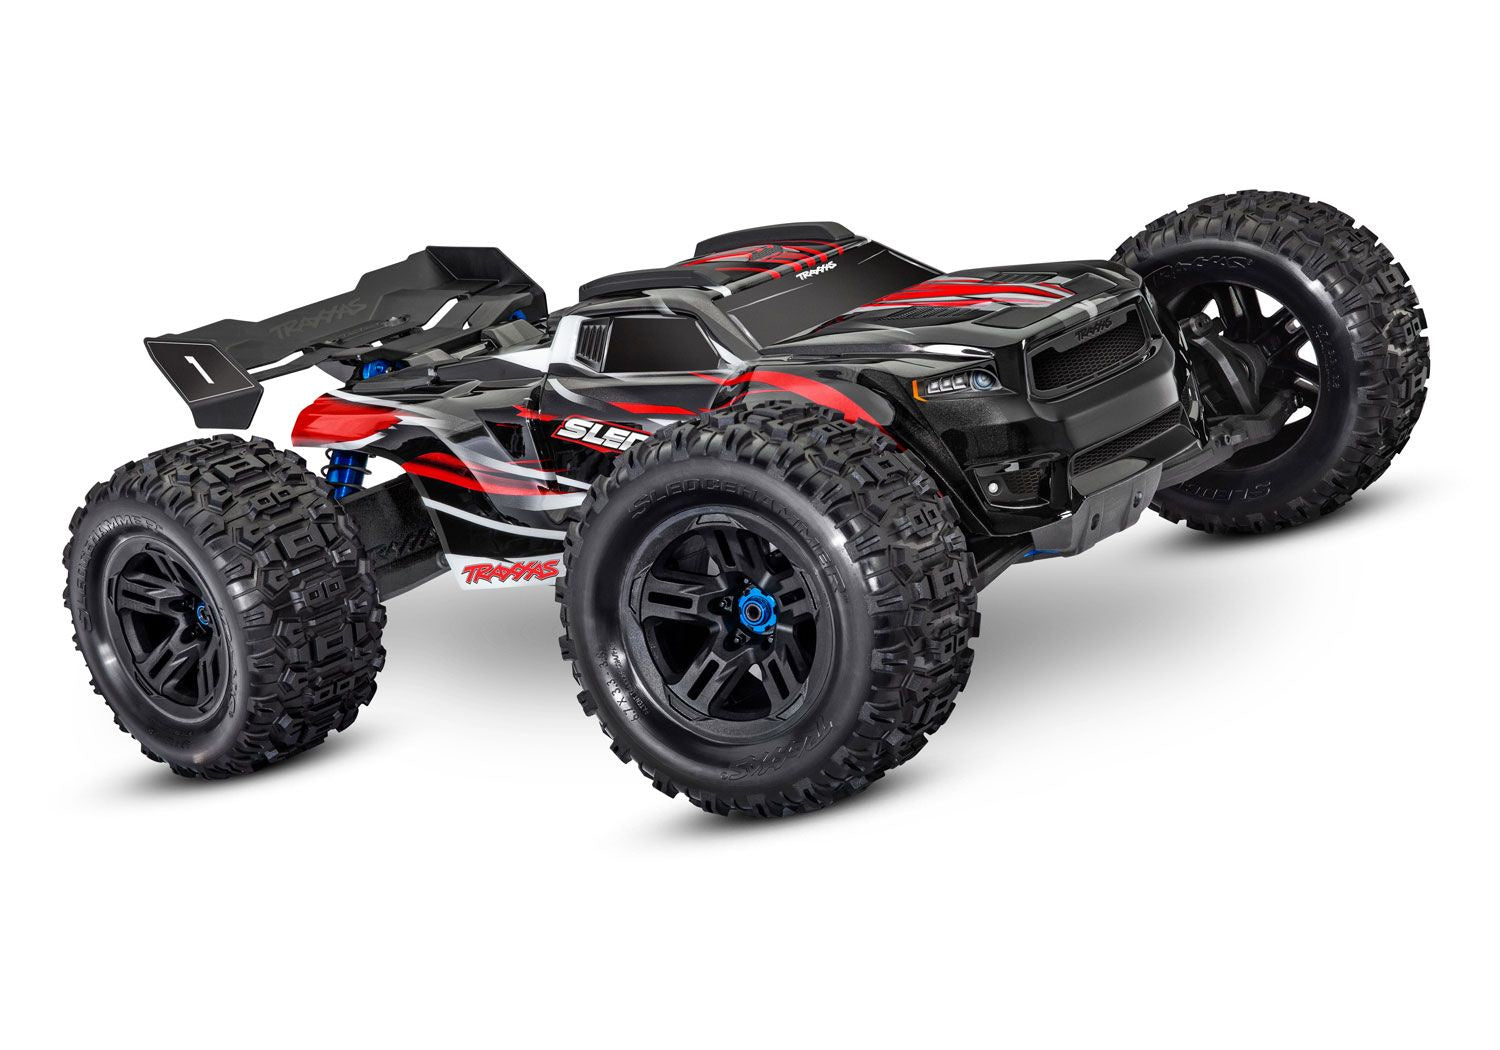 Red Sledge®: 1/8 Scale 4WD Brushless Electric Monster Truck with TQi 2.4GHz Traxxas Link™ Enabled Radio System and Traxxas Stability Management (TSM)®